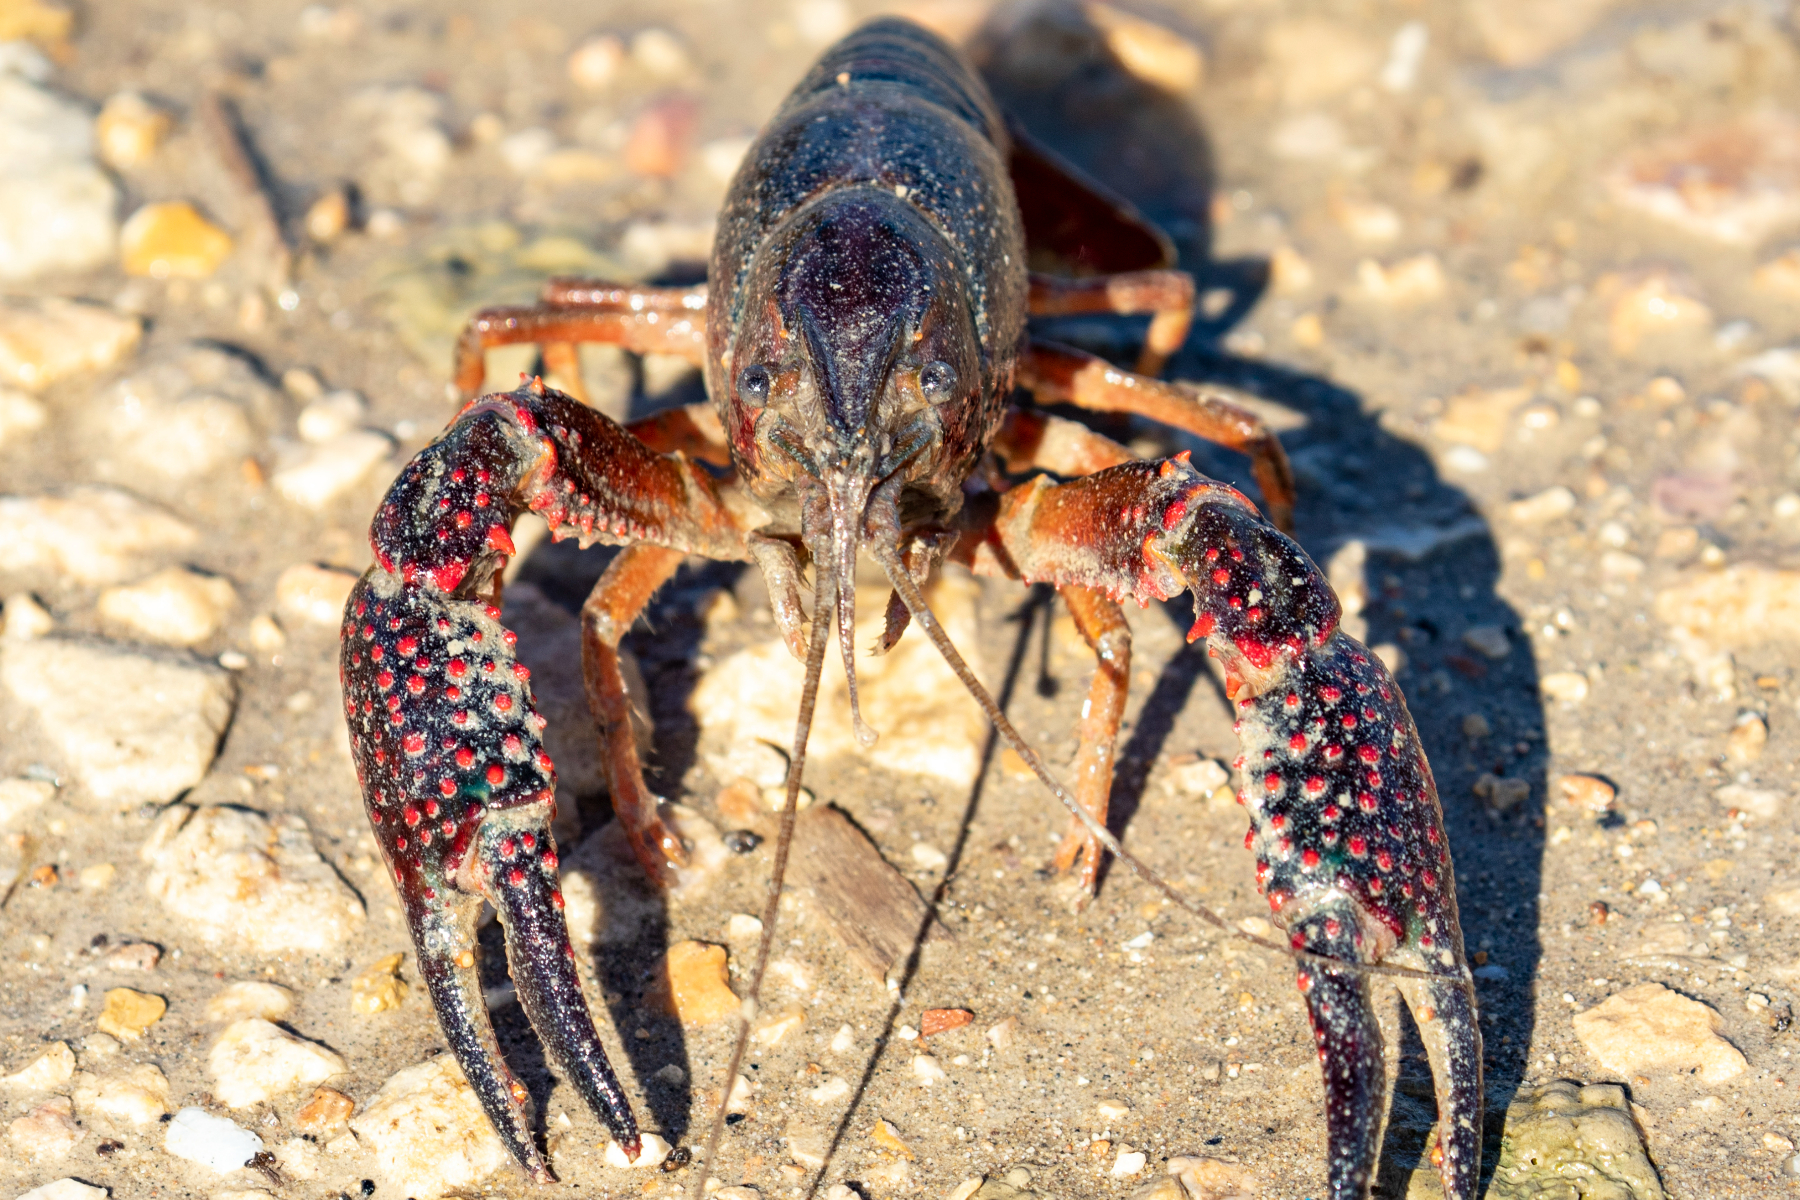 Invasive Rusty Crayfish Appear to Be Dying Off and It's Not Clear Why